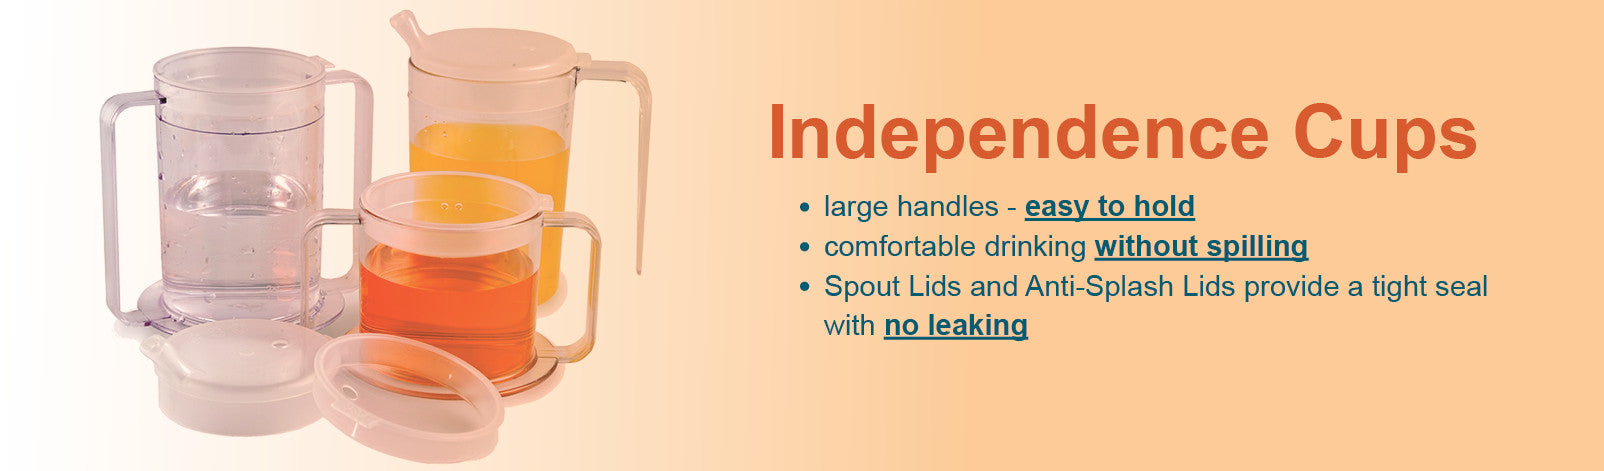 Spillproof Independence Cups with handles - 6 oz, 9 oz, 12 oz 